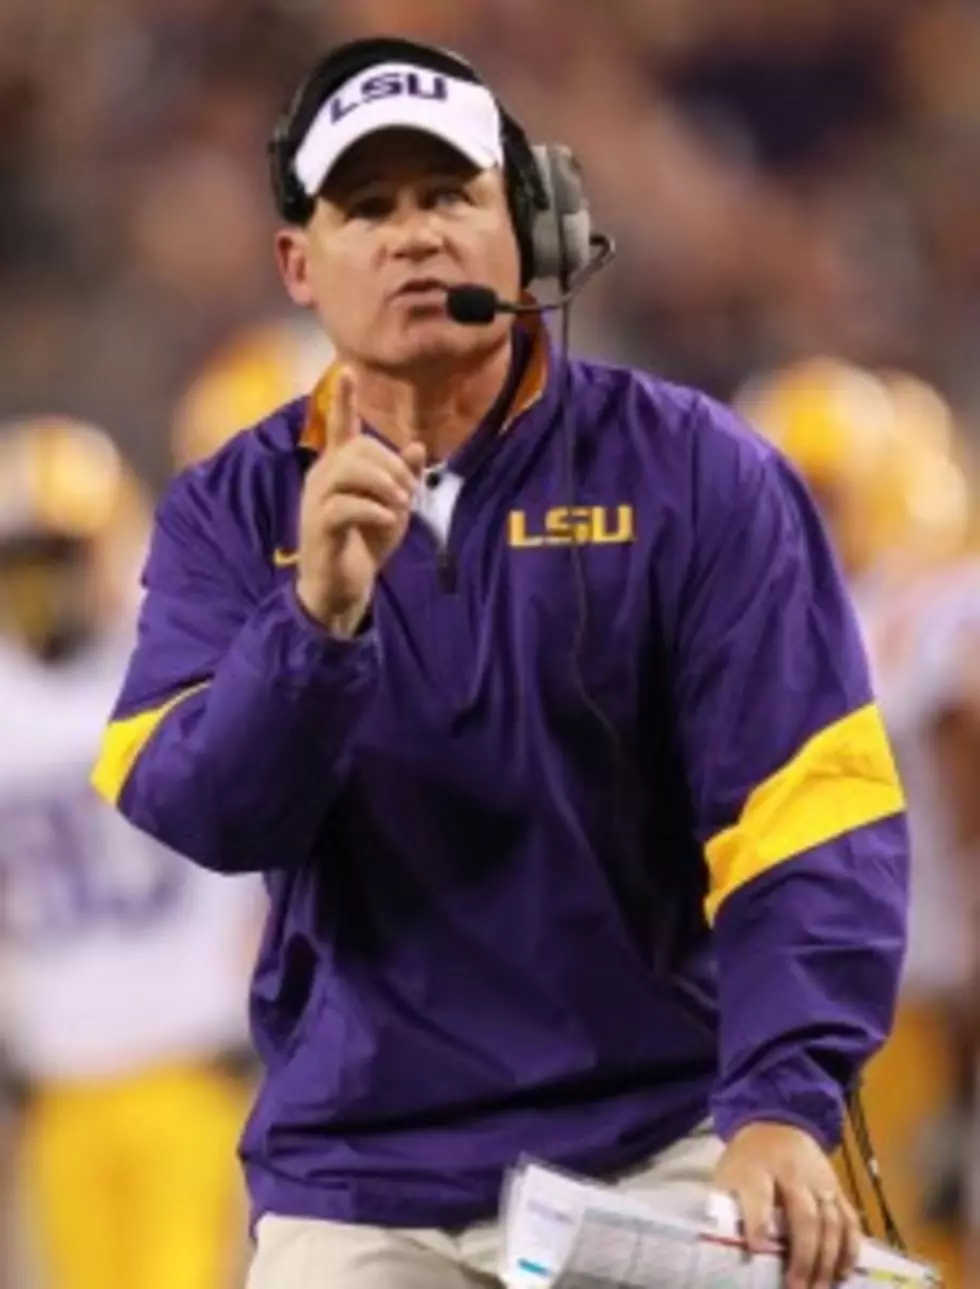 LSU Takes On Tough TCU Squad, Coaches Play Cat And Mouse Game